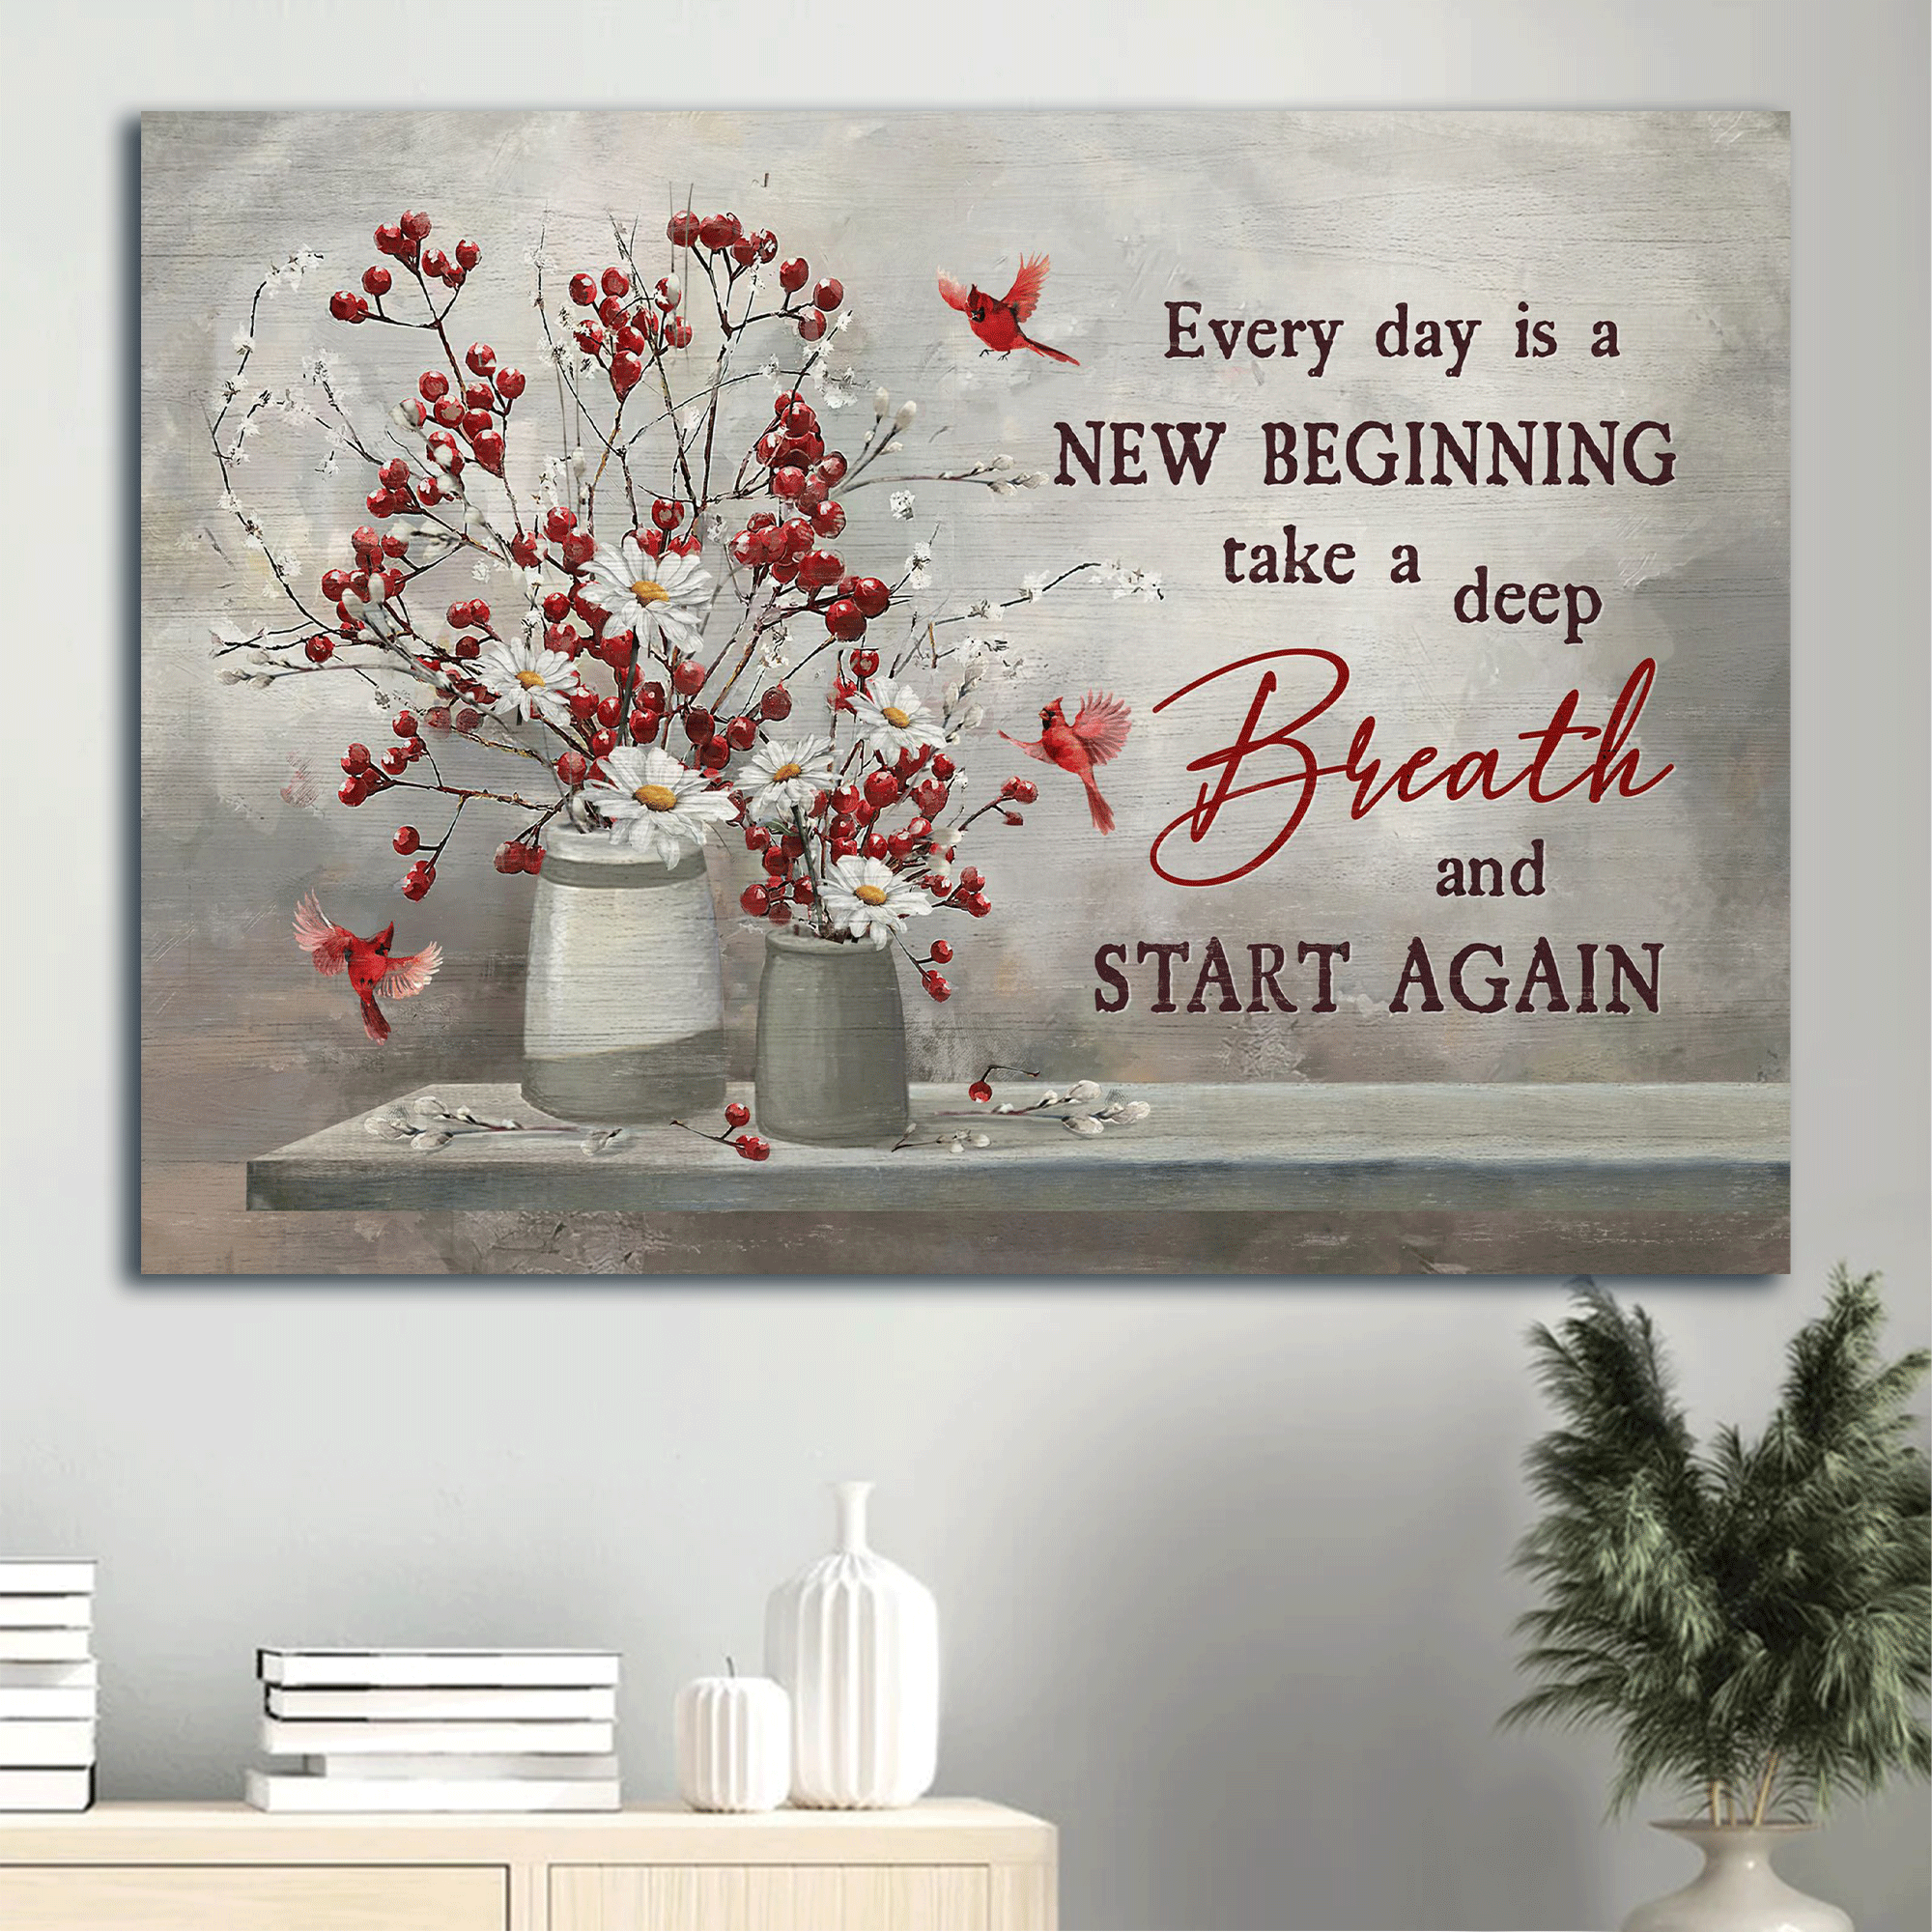 Jesus Landscape Canvas - Red cranberry, Daisy flower, Cardinal, Every day is a new beginning Landscape Canvas - Gift For Christian Canvas Prints, Christian Wall Art